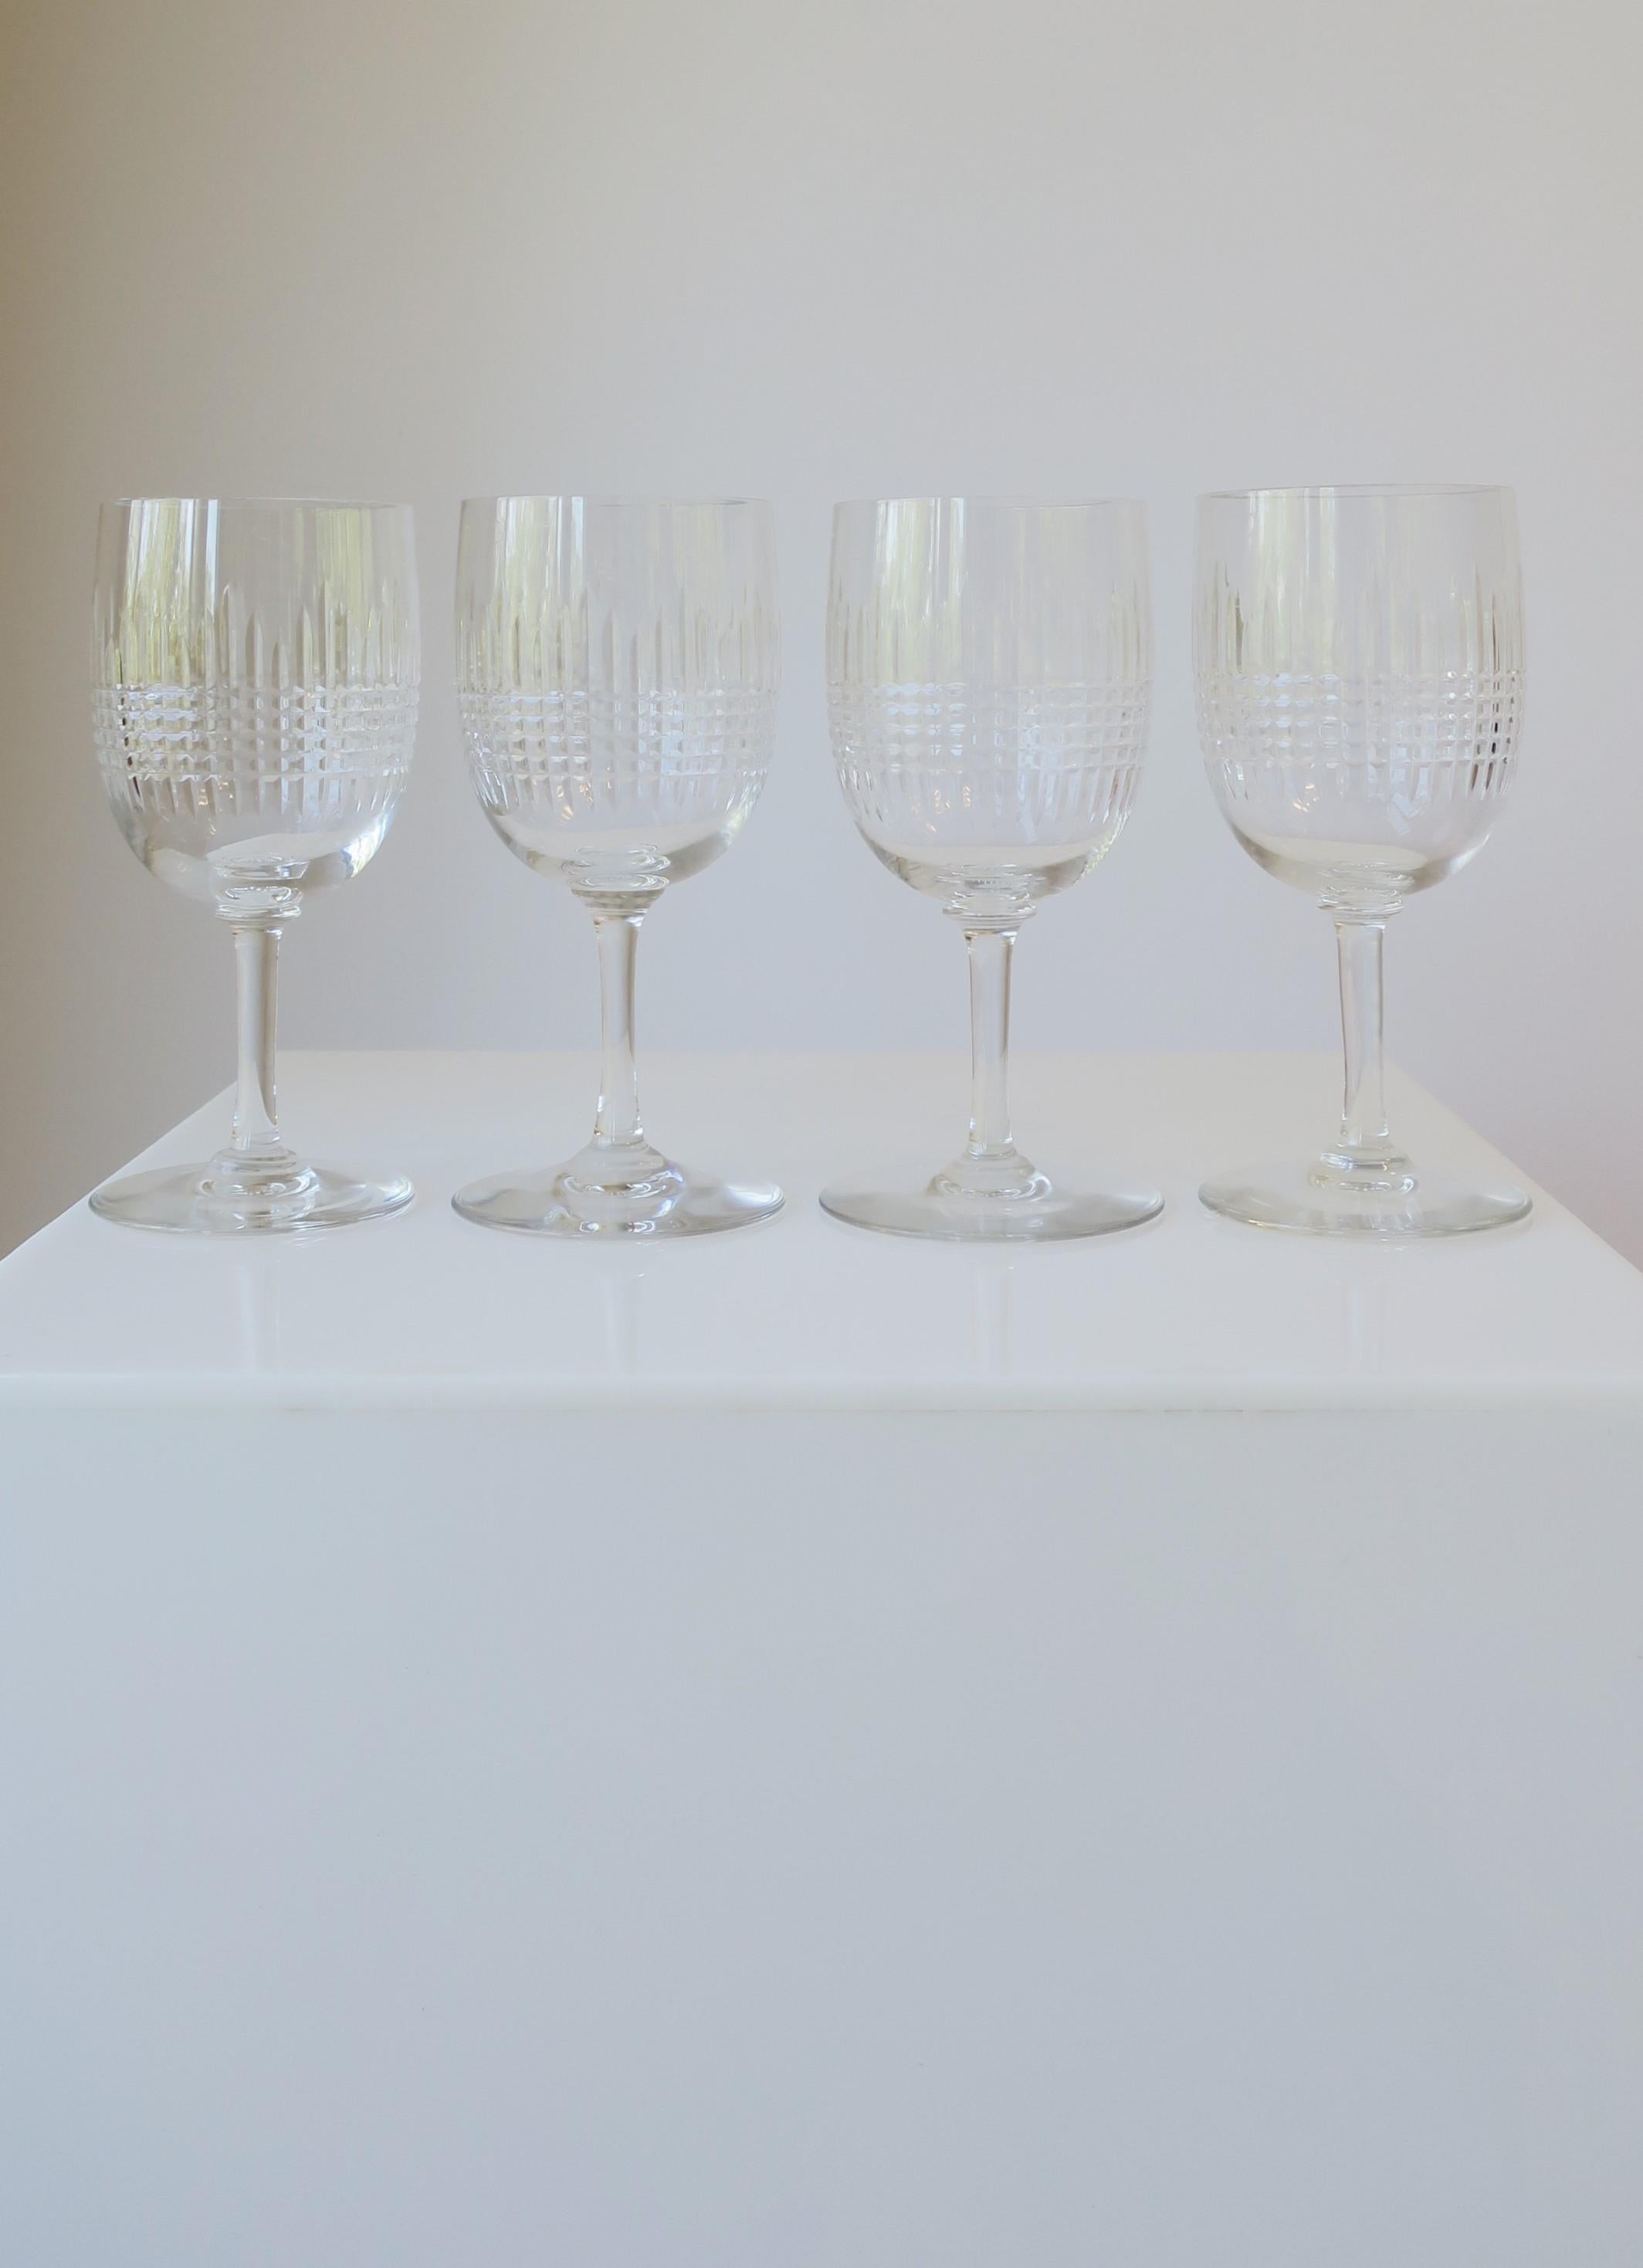 
**There are 2 sets of four (4) available for purchase.

A beautiful set of four (4) cut crystal wine, water or cocktail glasses from French luxury house Baccarat, circa late-20th century, France. In the 'Nancy' pattern. All marked on bottom with